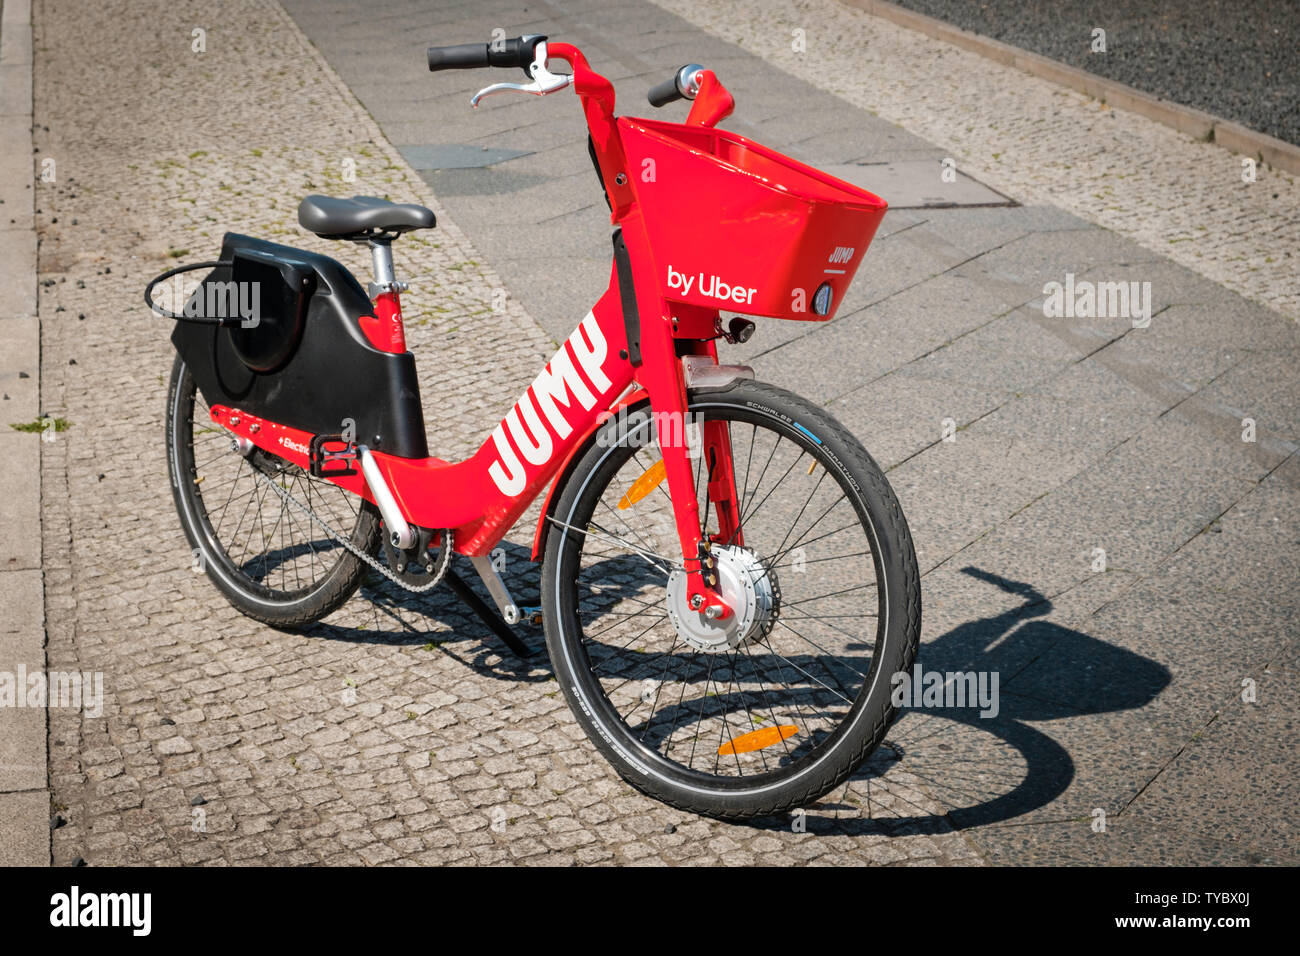 Rent Bike Berlin High Resolution Stock Photography and Images - Alamy